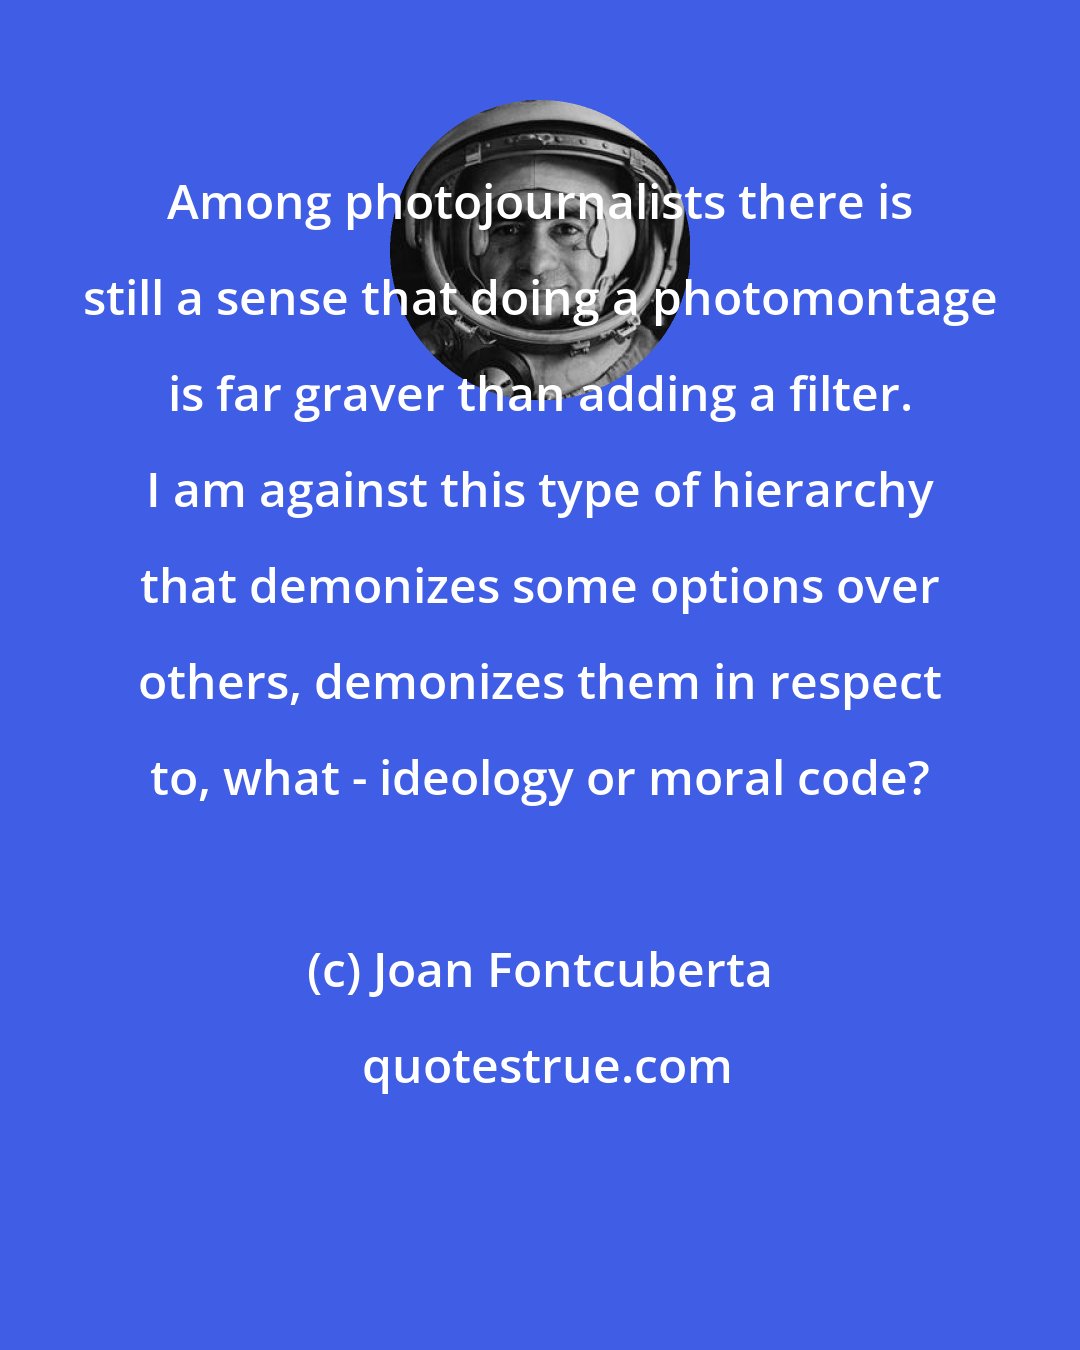 Joan Fontcuberta: Among photojournalists there is still a sense that doing a photomontage is far graver than adding a filter. I am against this type of hierarchy that demonizes some options over others, demonizes them in respect to, what - ideology or moral code?